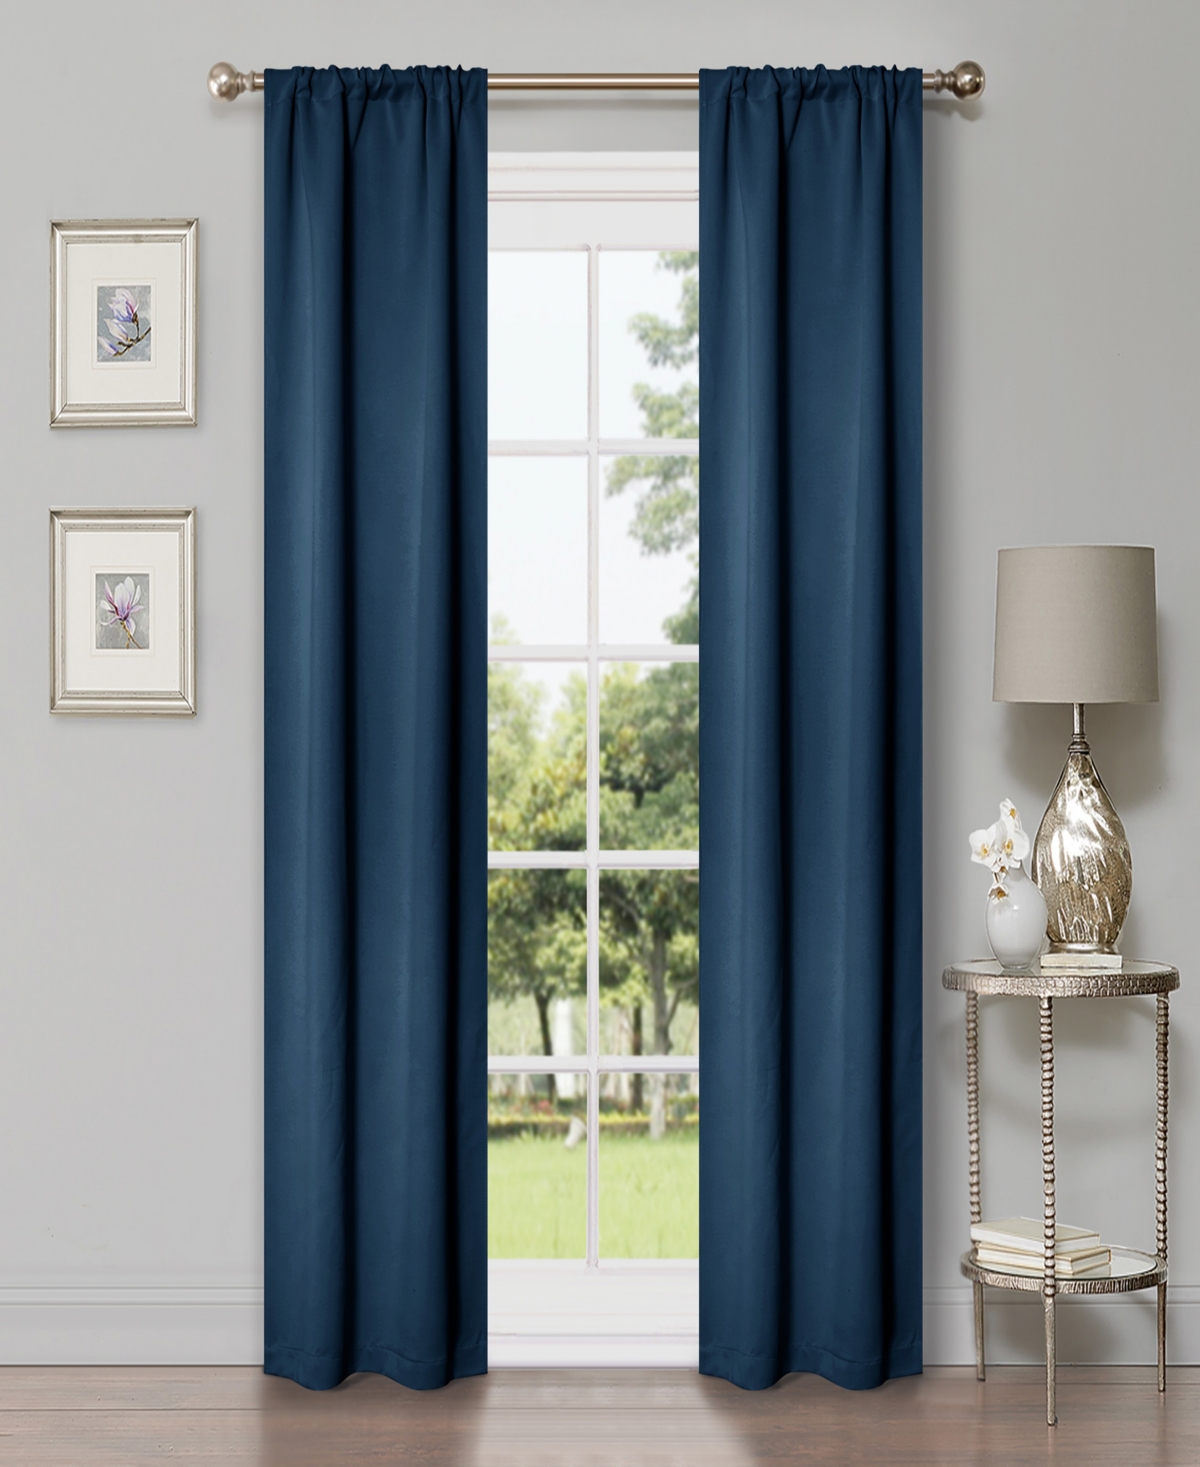 Solid Classic Modern Blackout Wrinkle Resistant Room Darkening 4-Piece Curtain Set with Rod Pocket, 26" X 84" - Navy blue